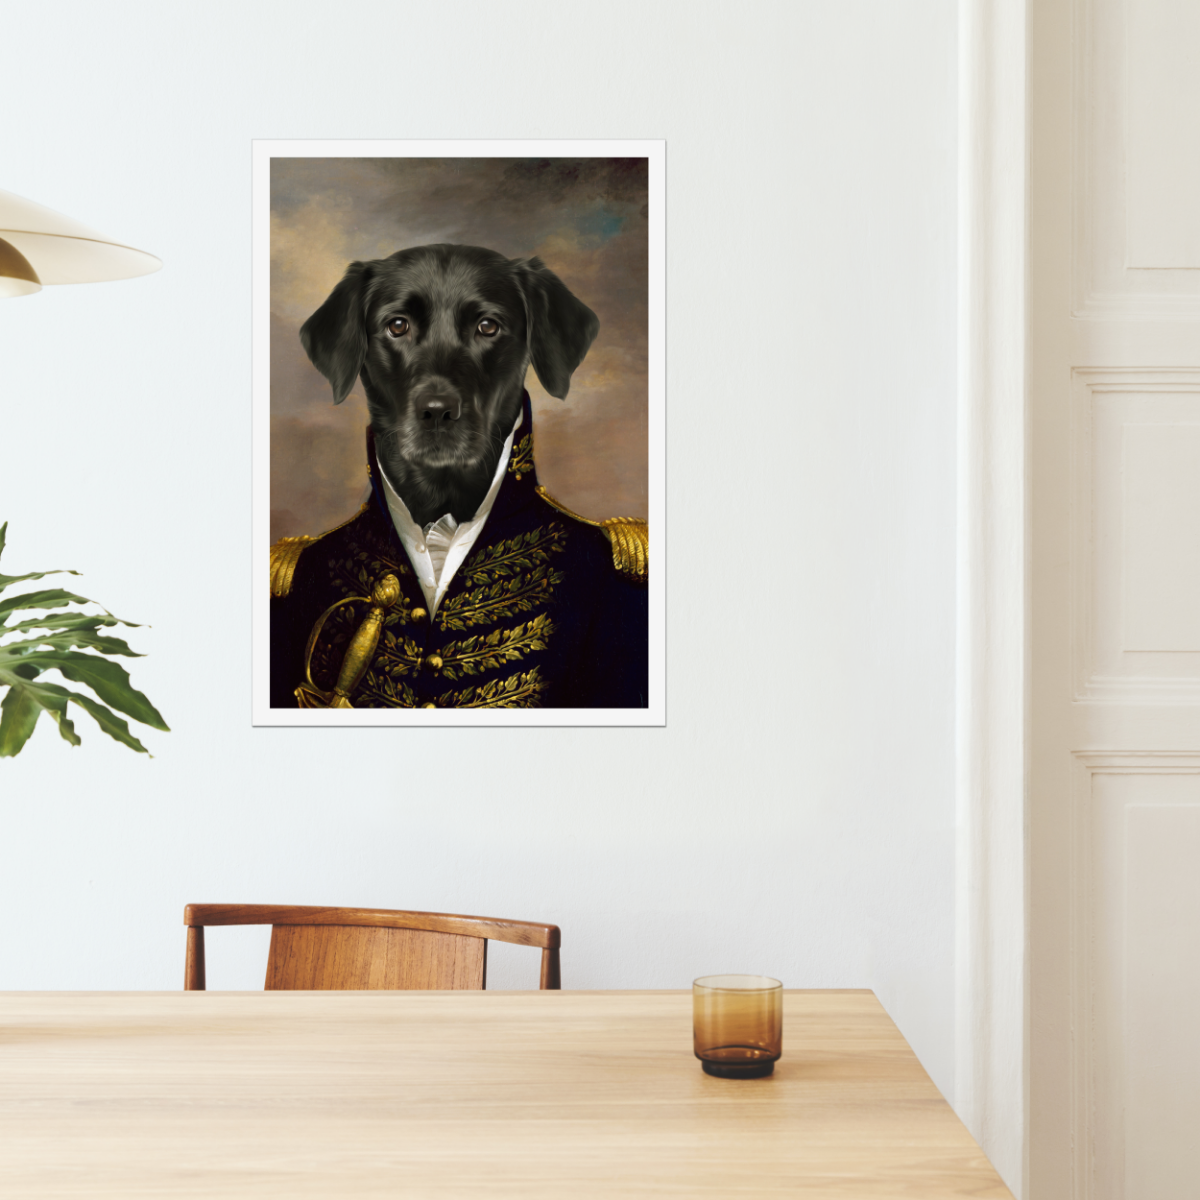 The General: Custom Pet Poster - Paw & Glory - #pet portraits# - #dog portraits# - #pet portraits uk#Paw & Glory, paw and glory, dog head on human body portrait uk, commission dog portrait pet character portraits paintings of dogs in clothes, cat portraits in costume cat portrait funny pet portraits